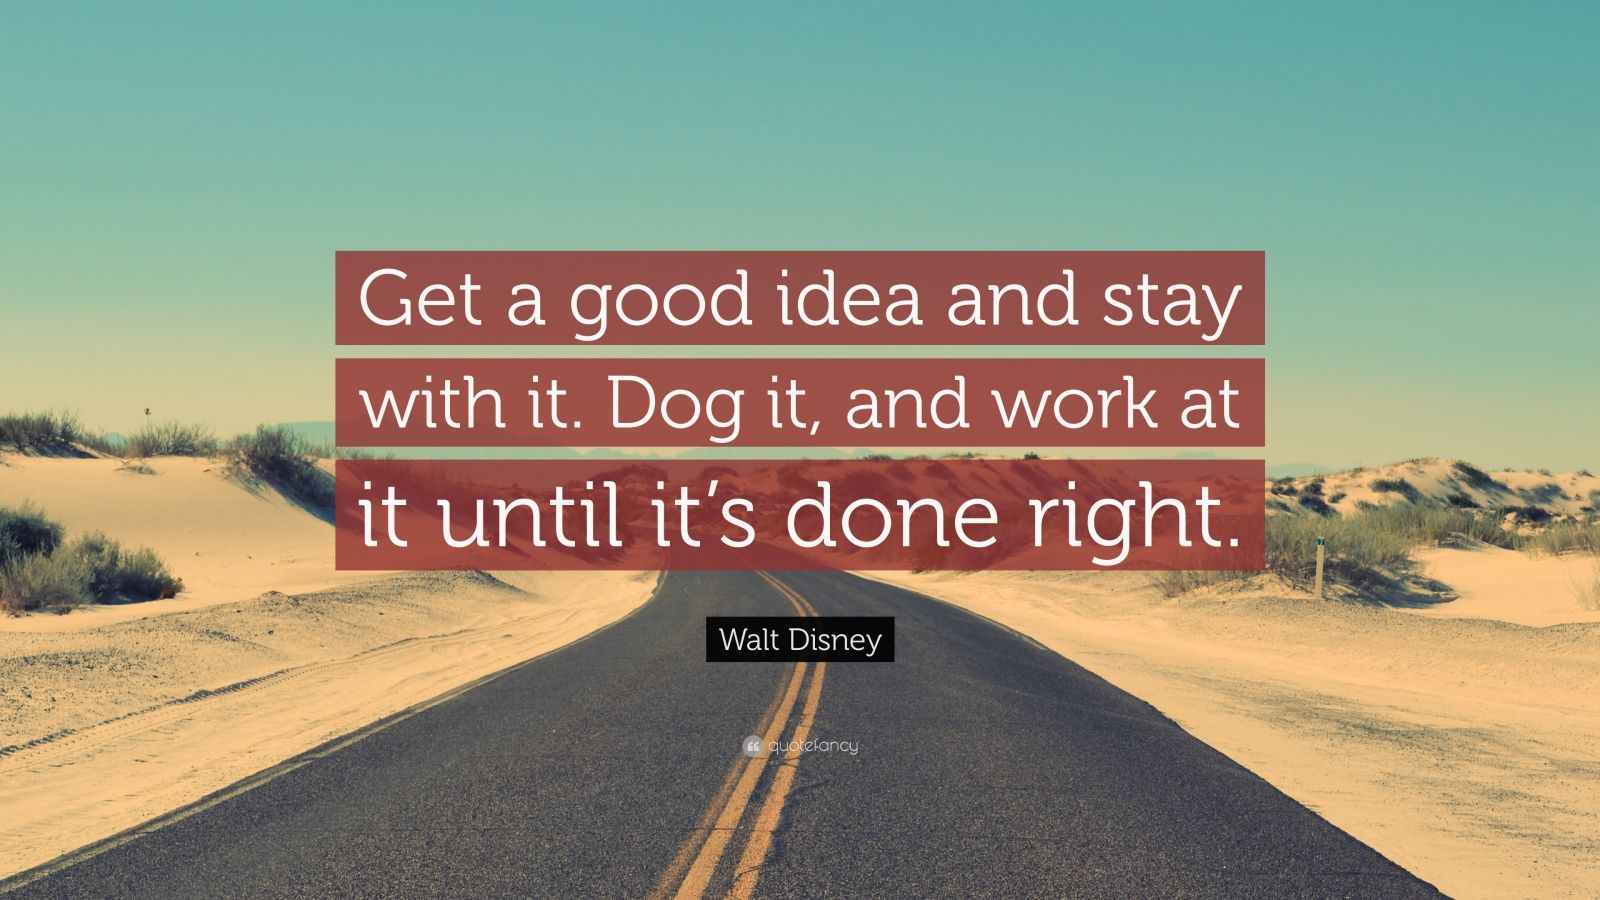 Walt Disney Quote: “Get a good idea and stay with it. Dog it, and work